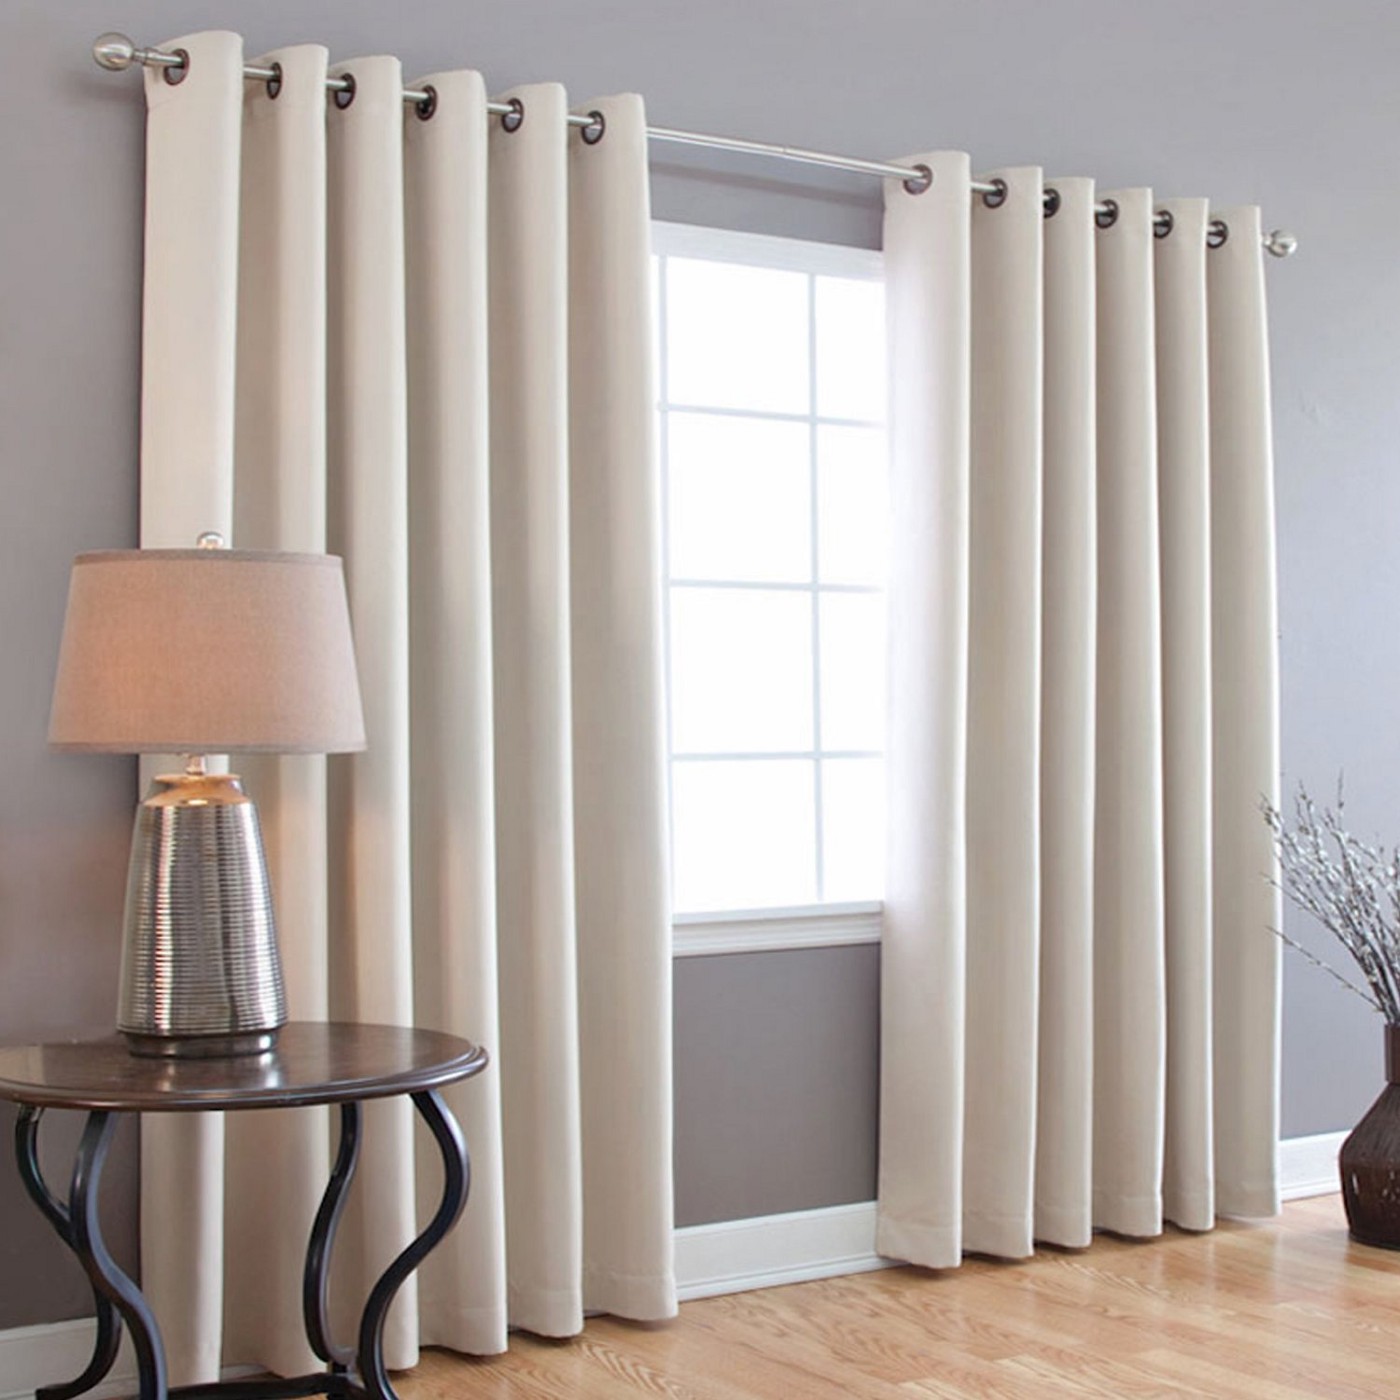 How to Choose Curtains for Windows